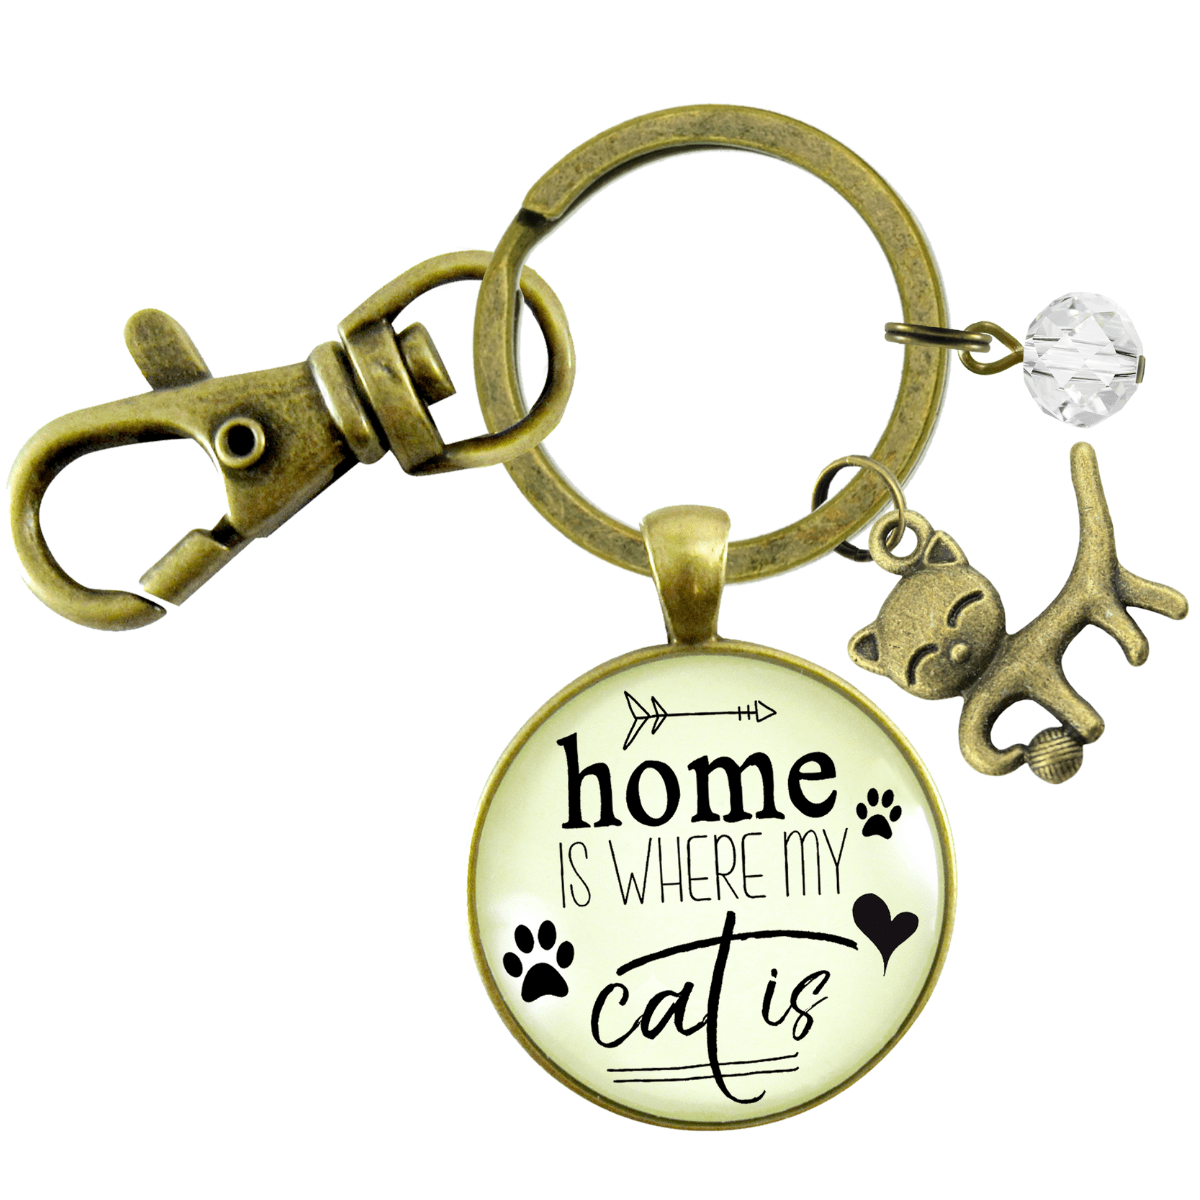 Cat Keychain Home Is Where My Cat Is Gift Quote Kitty Lover Related Feline Jewelry For Women - Gutsy Goodness Handmade Jewelry;Cat Keychain Home Is Where My Cat Is Gift Quote Kitty Lover Related Feline Jewelry For Women - Gutsy Goodness Handmade Jewelry Gifts